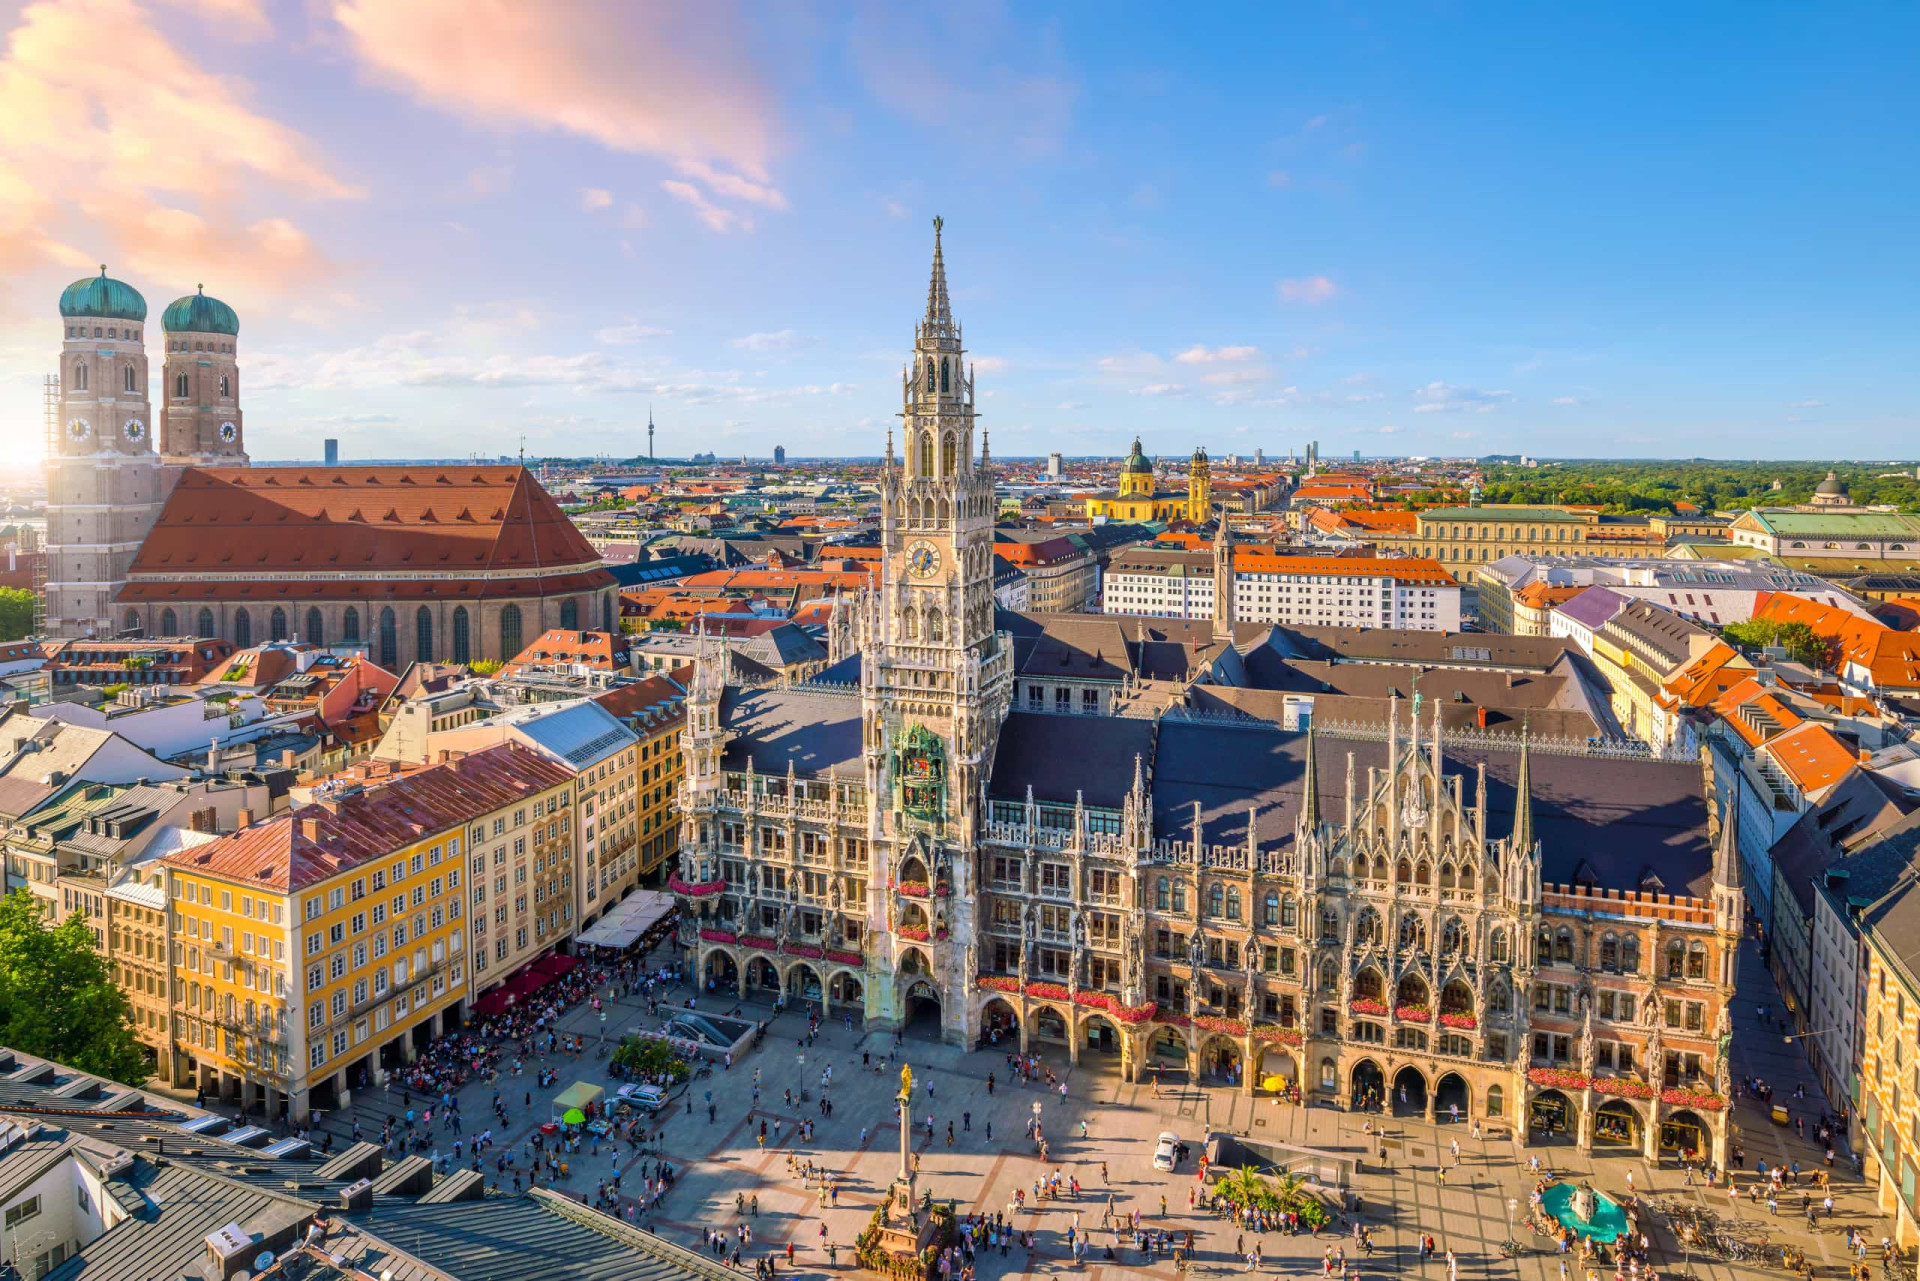 <p>Munich's Marienplatz is dominated by the ornate new town hall, which in fact dates back to 1874. The old town hall stands nearby, though is not as impressive architecturally. Marienplatz is renowned across Germany for hosting one of the country's most magical Christmas markets.</p><p>You may also like:<a href="https://www.starsinsider.com/n/491939?utm_source=msn.com&utm_medium=display&utm_campaign=referral_description&utm_content=481885v1en-us"> What it was like to be a Christian in Roman times</a></p>